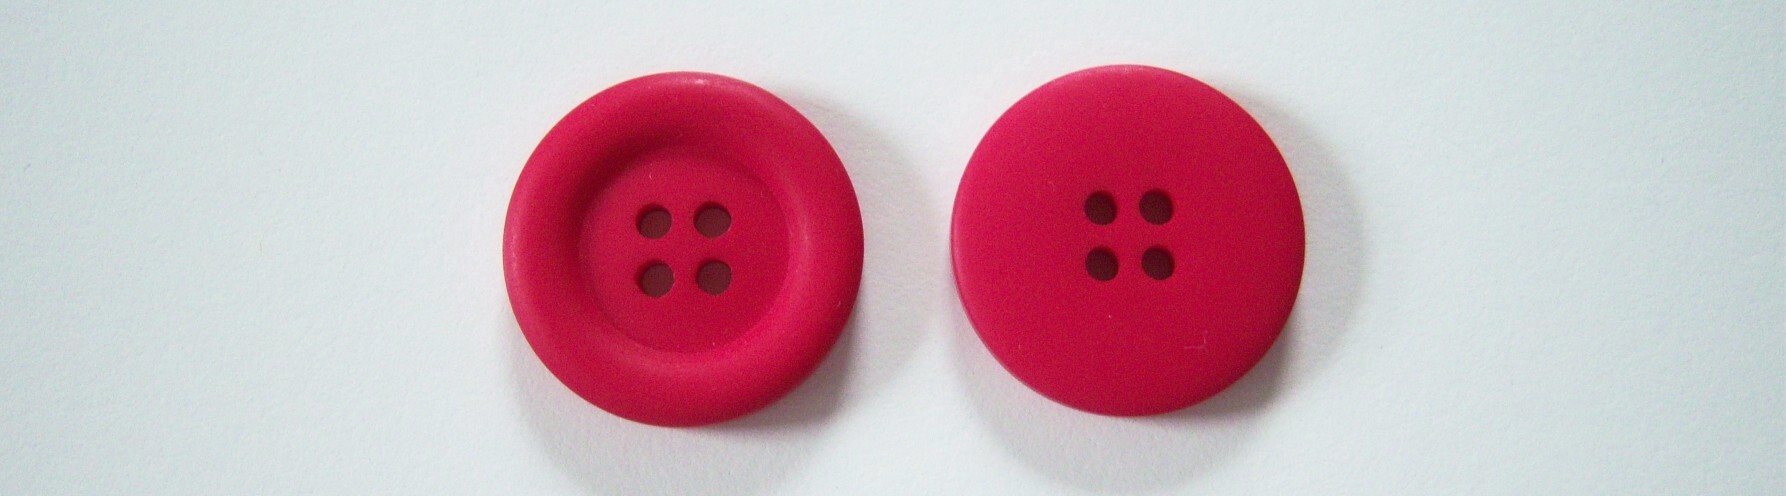 Shocking Pink 1" Two Buttons - oebnpr1